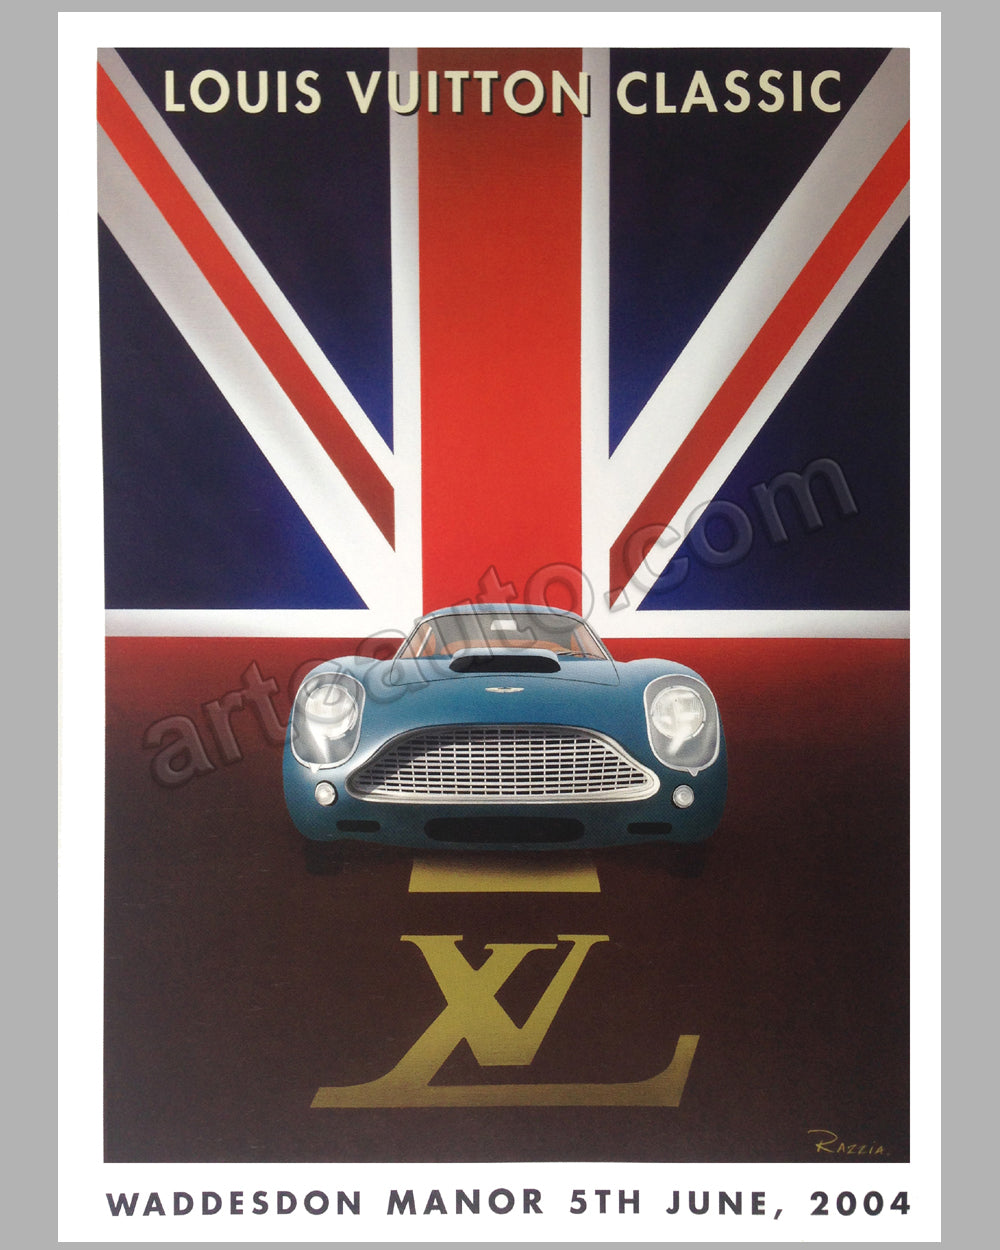 Louis Vuitton Classic 2004 Waddesdon Manor Concours d&#39;Elegance U.K. large poster by Razzia